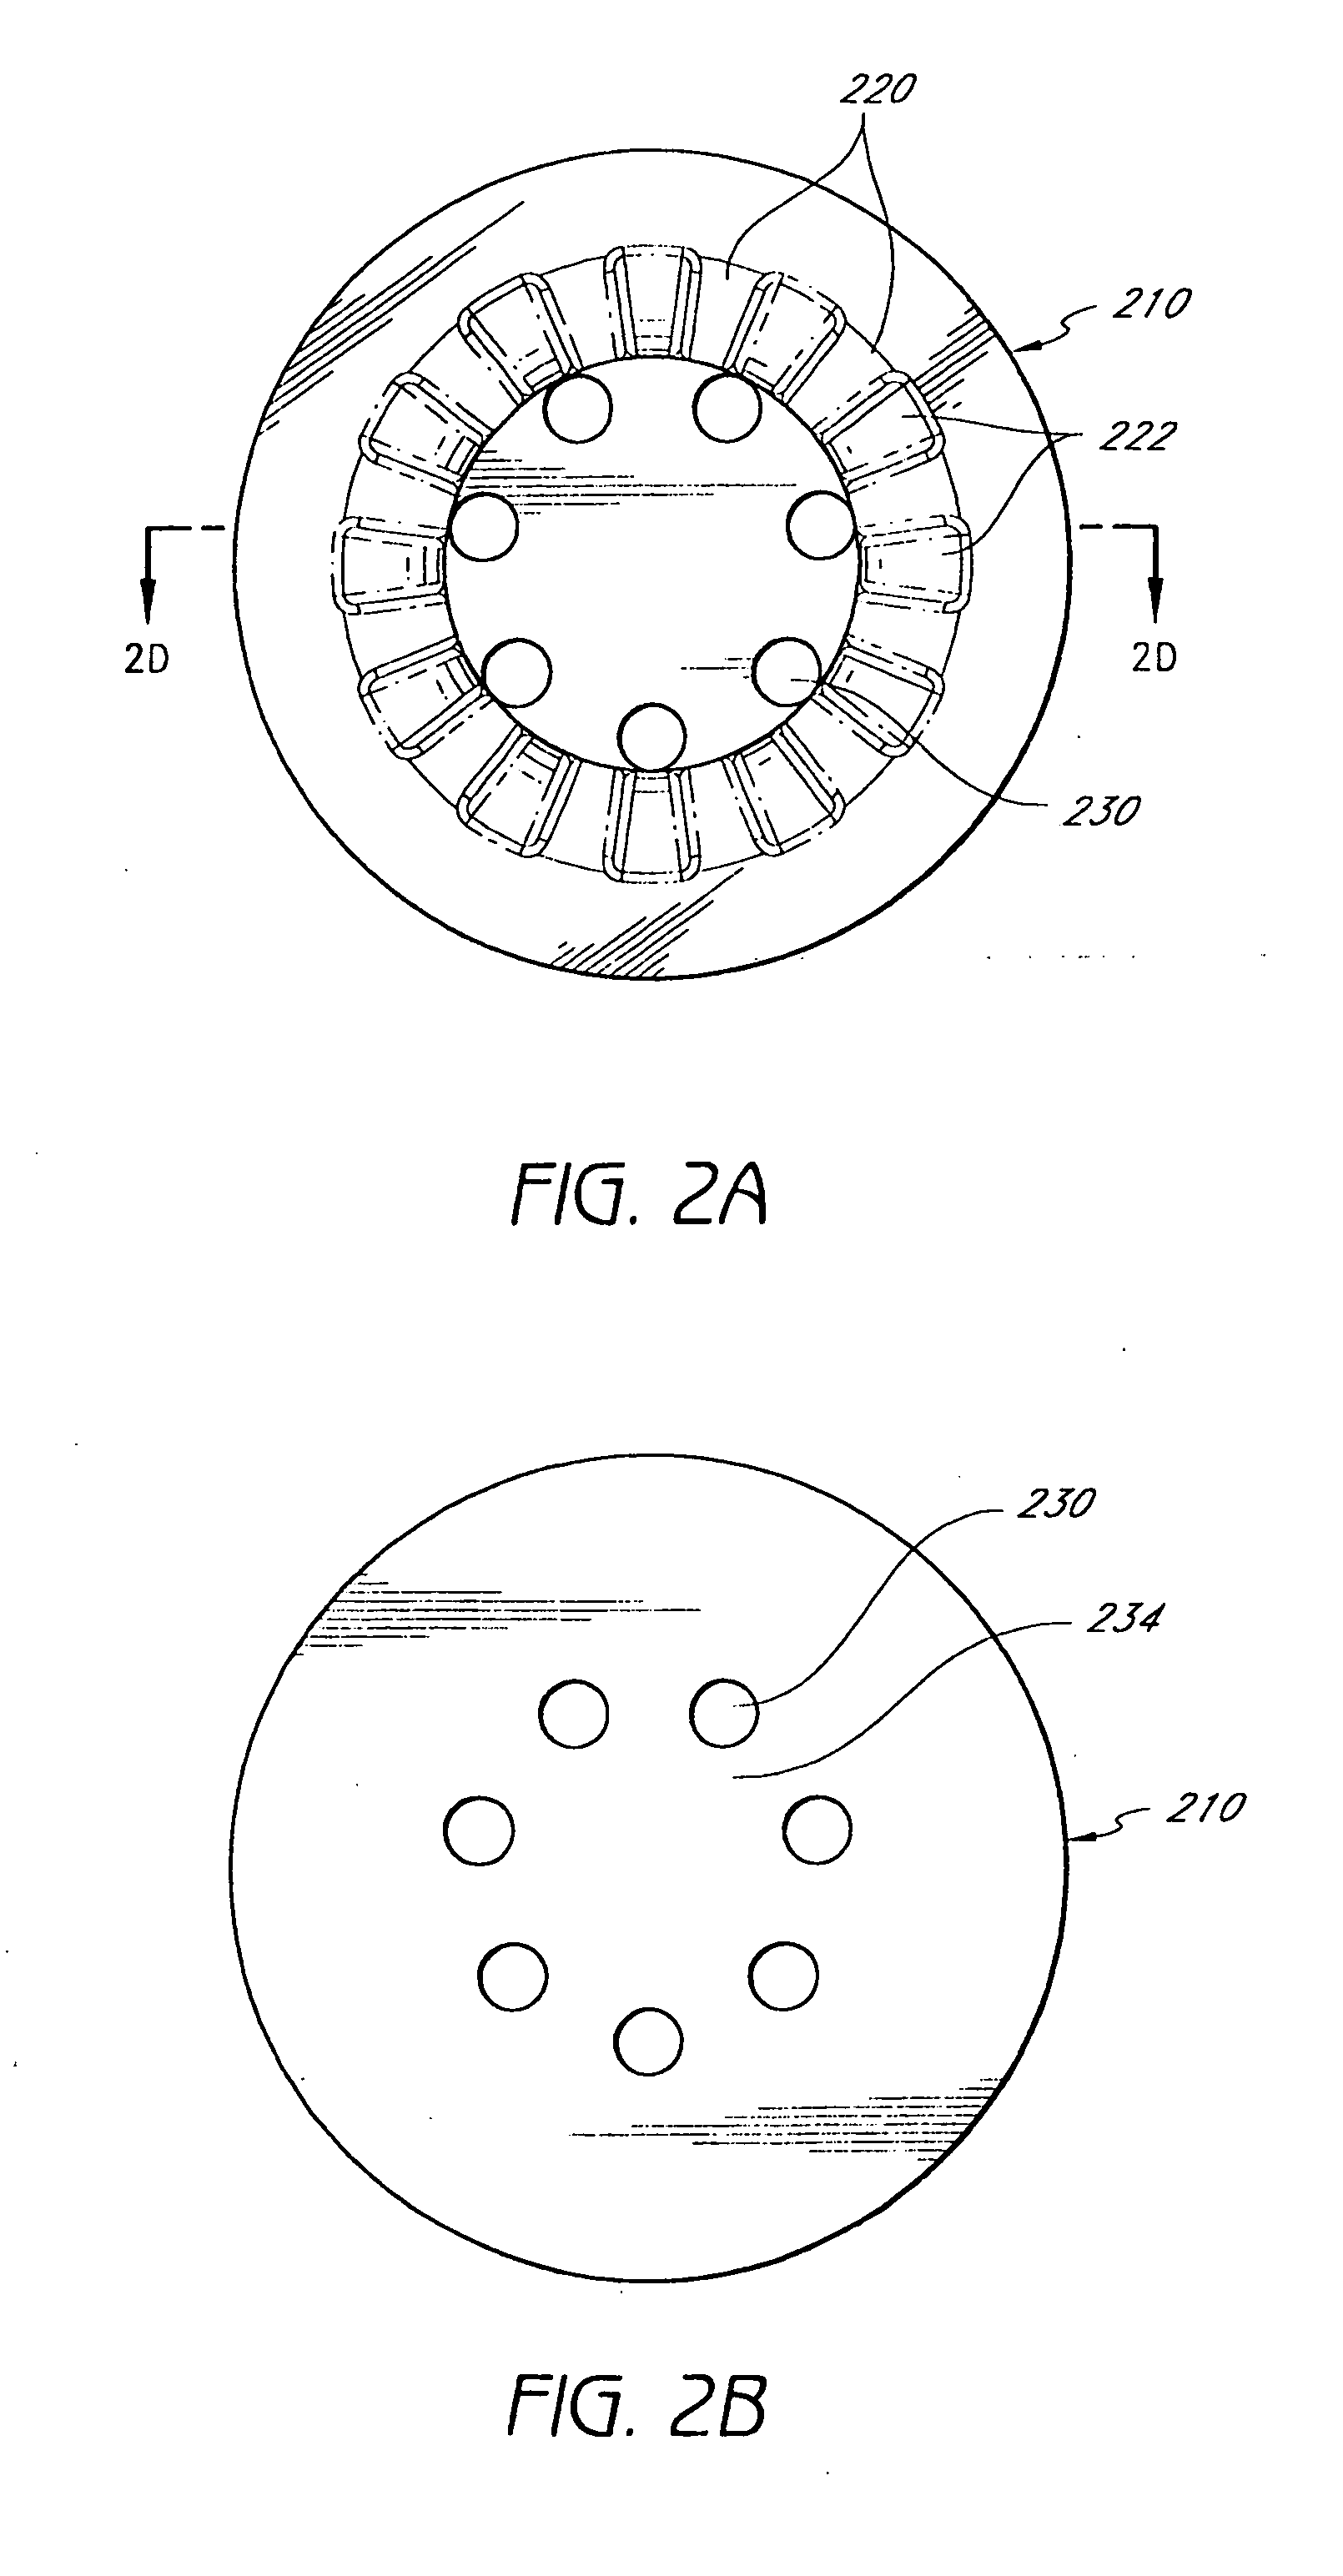 Valve for facilitating and maintaining separation of fluids and materials